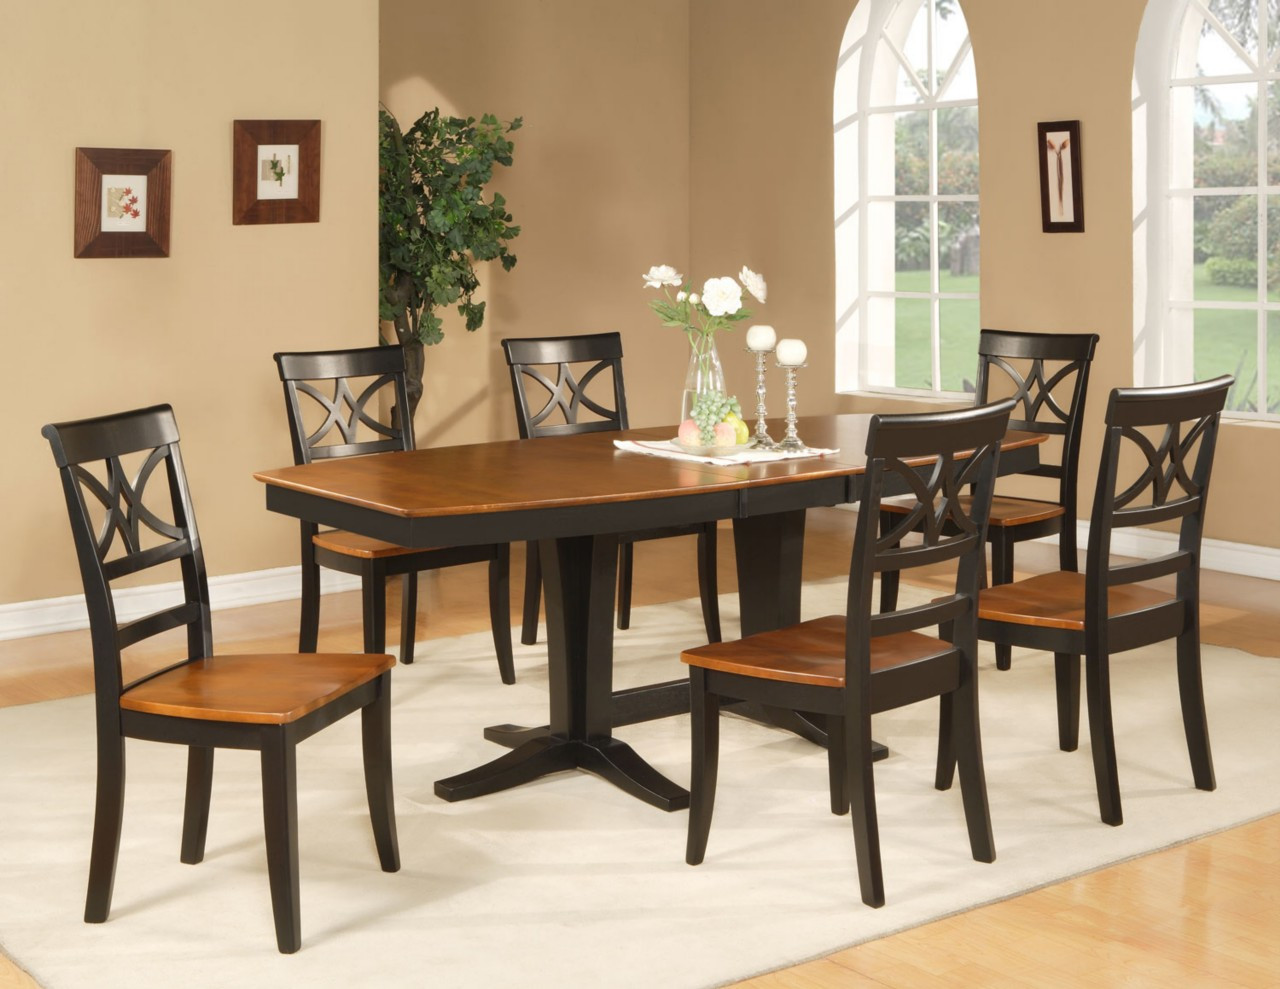 8 Chair Dinner Table
 Dining Room Table 8 Chairs